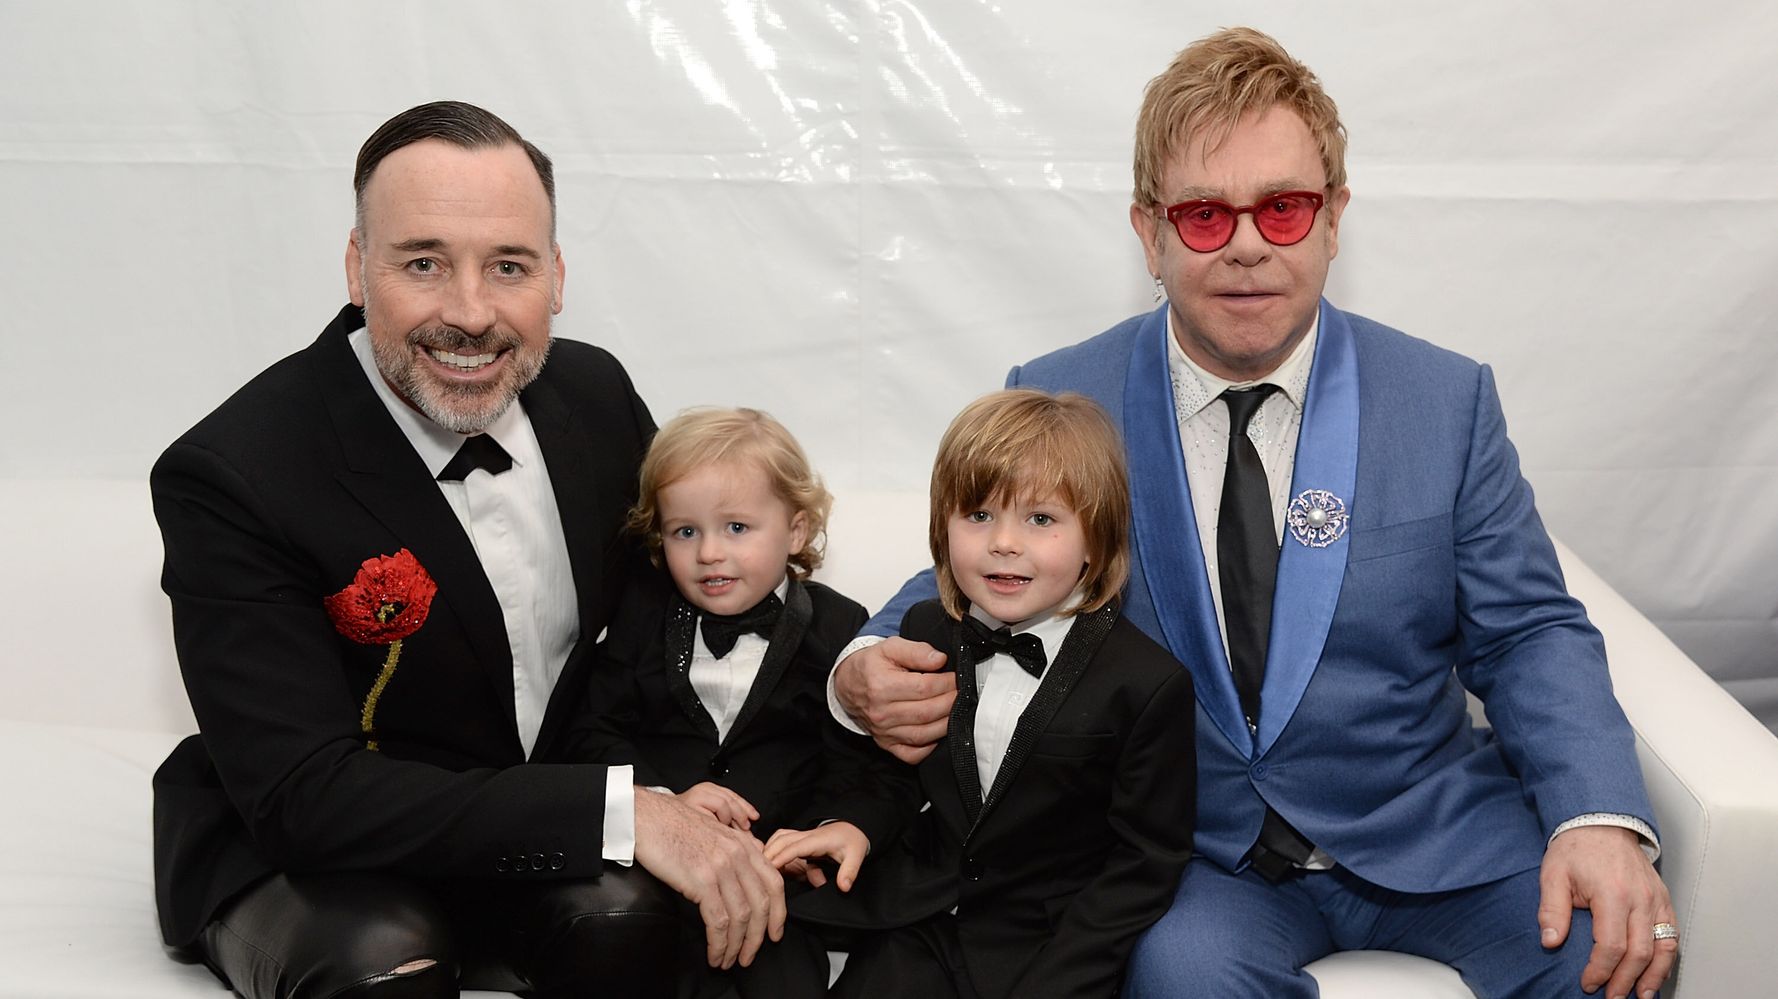 9 Thoughtful Quotes About Parenthood From Elton John